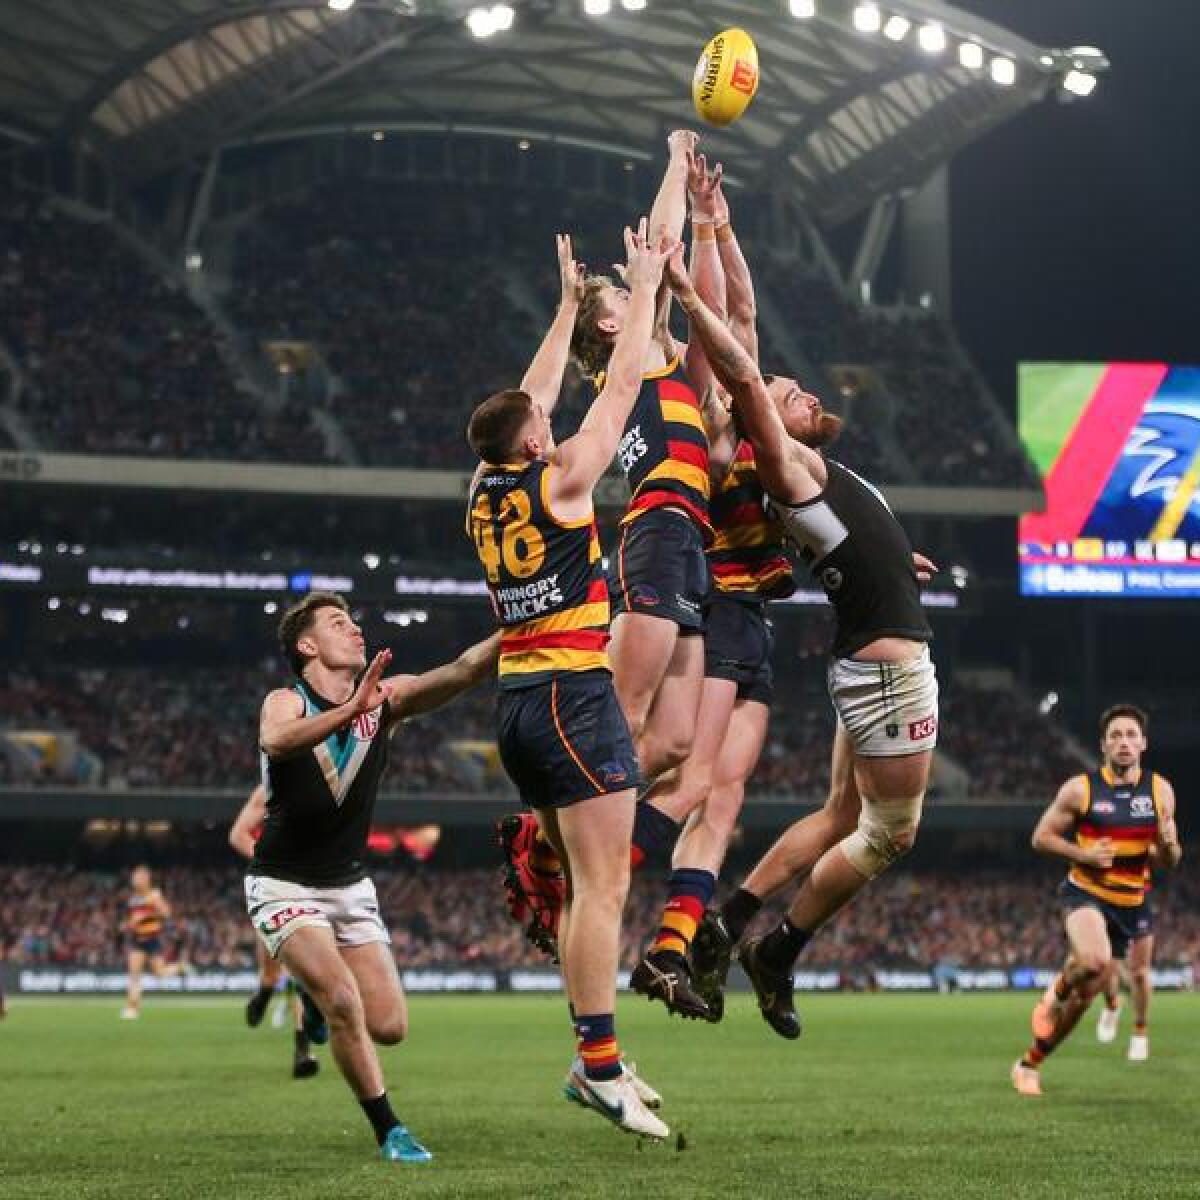 Action from Adelaide Crows v Port Adelaide.